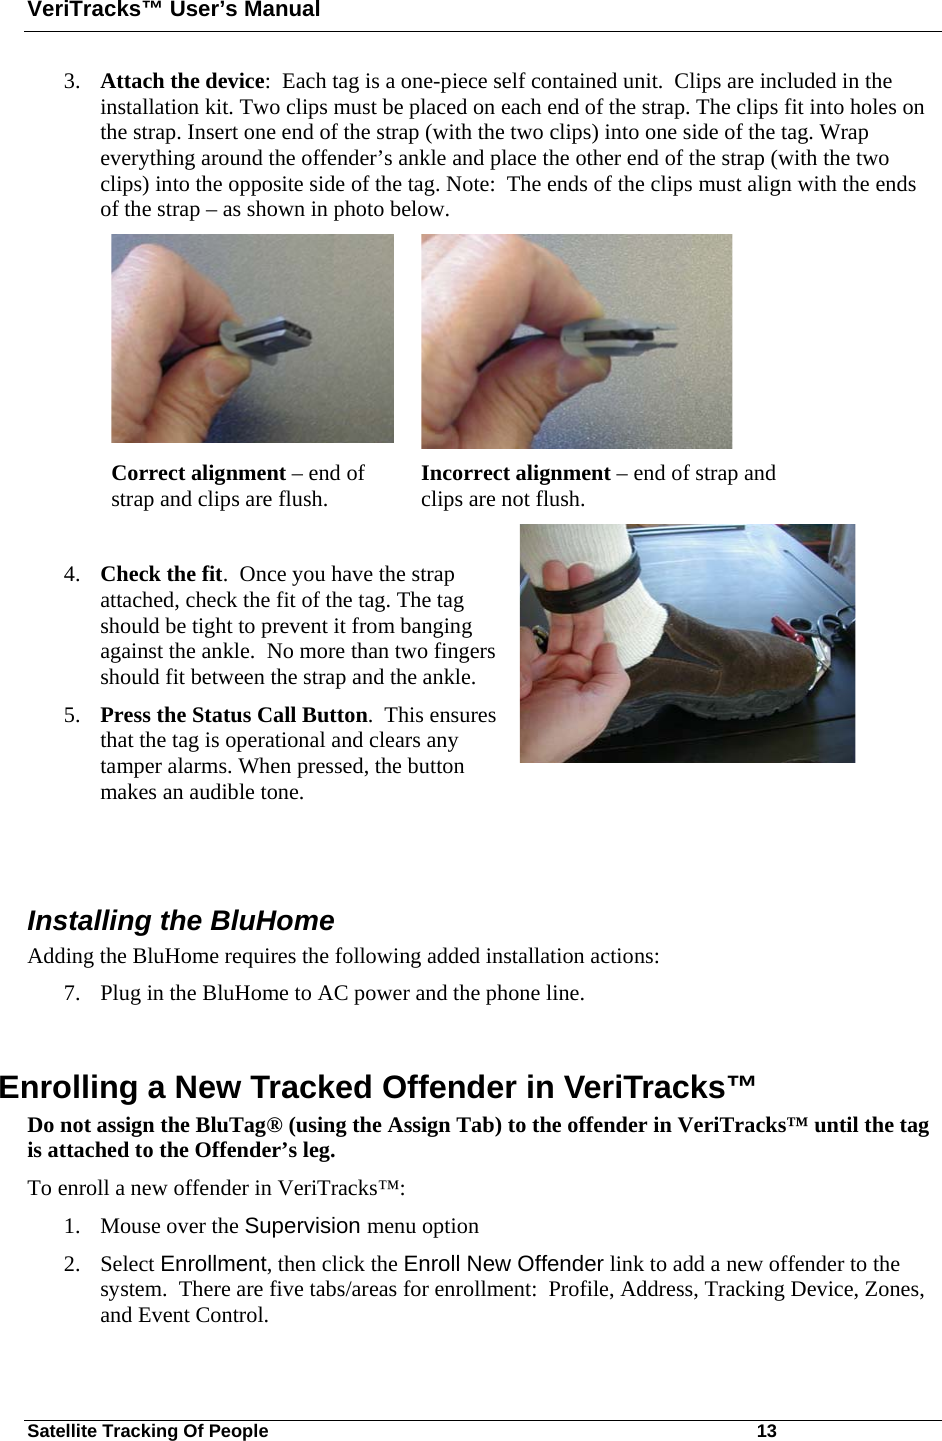 VeriTracks™ User’s Manual Satellite Tracking Of People       13 3. Attach the device:  Each tag is a one-piece self contained unit.  Clips are included in the installation kit. Two clips must be placed on each end of the strap. The clips fit into holes on the strap. Insert one end of the strap (with the two clips) into one side of the tag. Wrap everything around the offender’s ankle and place the other end of the strap (with the two clips) into the opposite side of the tag. Note:  The ends of the clips must align with the ends of the strap – as shown in photo below.         Correct alignment – end of strap and clips are flush.  Incorrect alignment – end of strap and clips are not flush.  4. Check the fit.  Once you have the strap attached, check the fit of the tag. The tag should be tight to prevent it from banging against the ankle.  No more than two fingers should fit between the strap and the ankle.  5. Press the Status Call Button.  This ensures that the tag is operational and clears any tamper alarms. When pressed, the button makes an audible tone.    Installing the BluHome Adding the BluHome requires the following added installation actions: 7. Plug in the BluHome to AC power and the phone line.  Enrolling a New Tracked Offender in VeriTracks™  Do not assign the BluTag® (using the Assign Tab) to the offender in VeriTracks™ until the tag is attached to the Offender’s leg.  To enroll a new offender in VeriTracks™: 1. Mouse over the Supervision menu option 2. Select Enrollment, then click the Enroll New Offender link to add a new offender to the system.  There are five tabs/areas for enrollment:  Profile, Address, Tracking Device, Zones, and Event Control.   